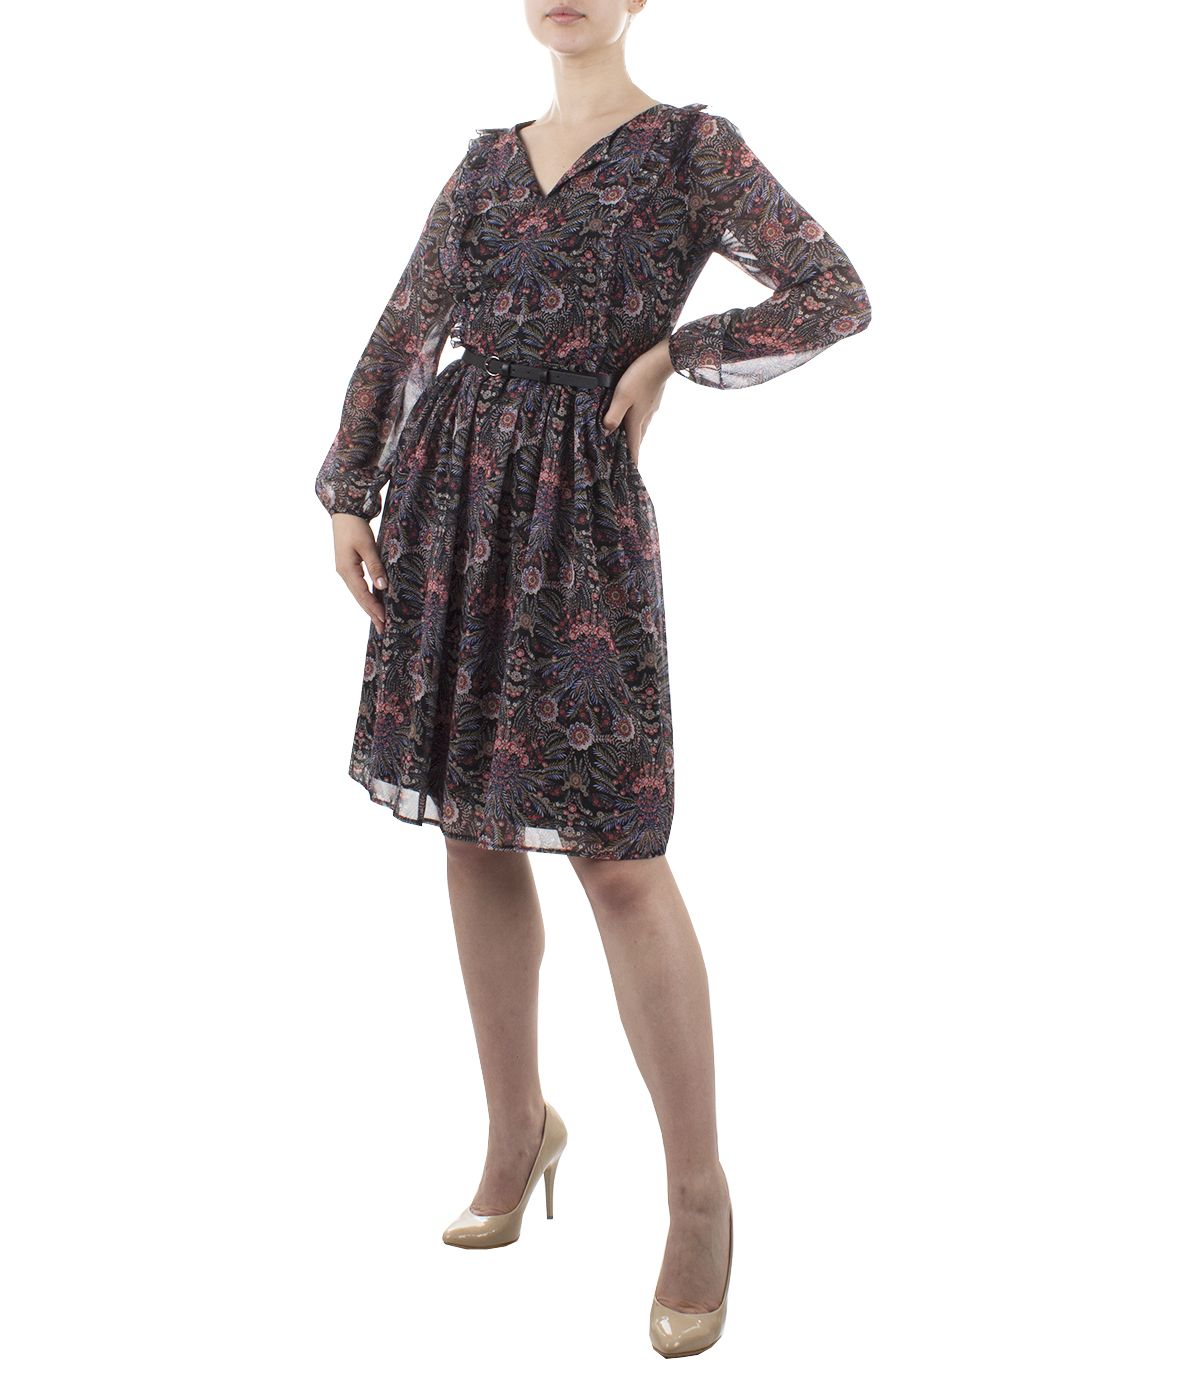 Chiffon dress with long sleeves, emphasized waist, with paisley print  3